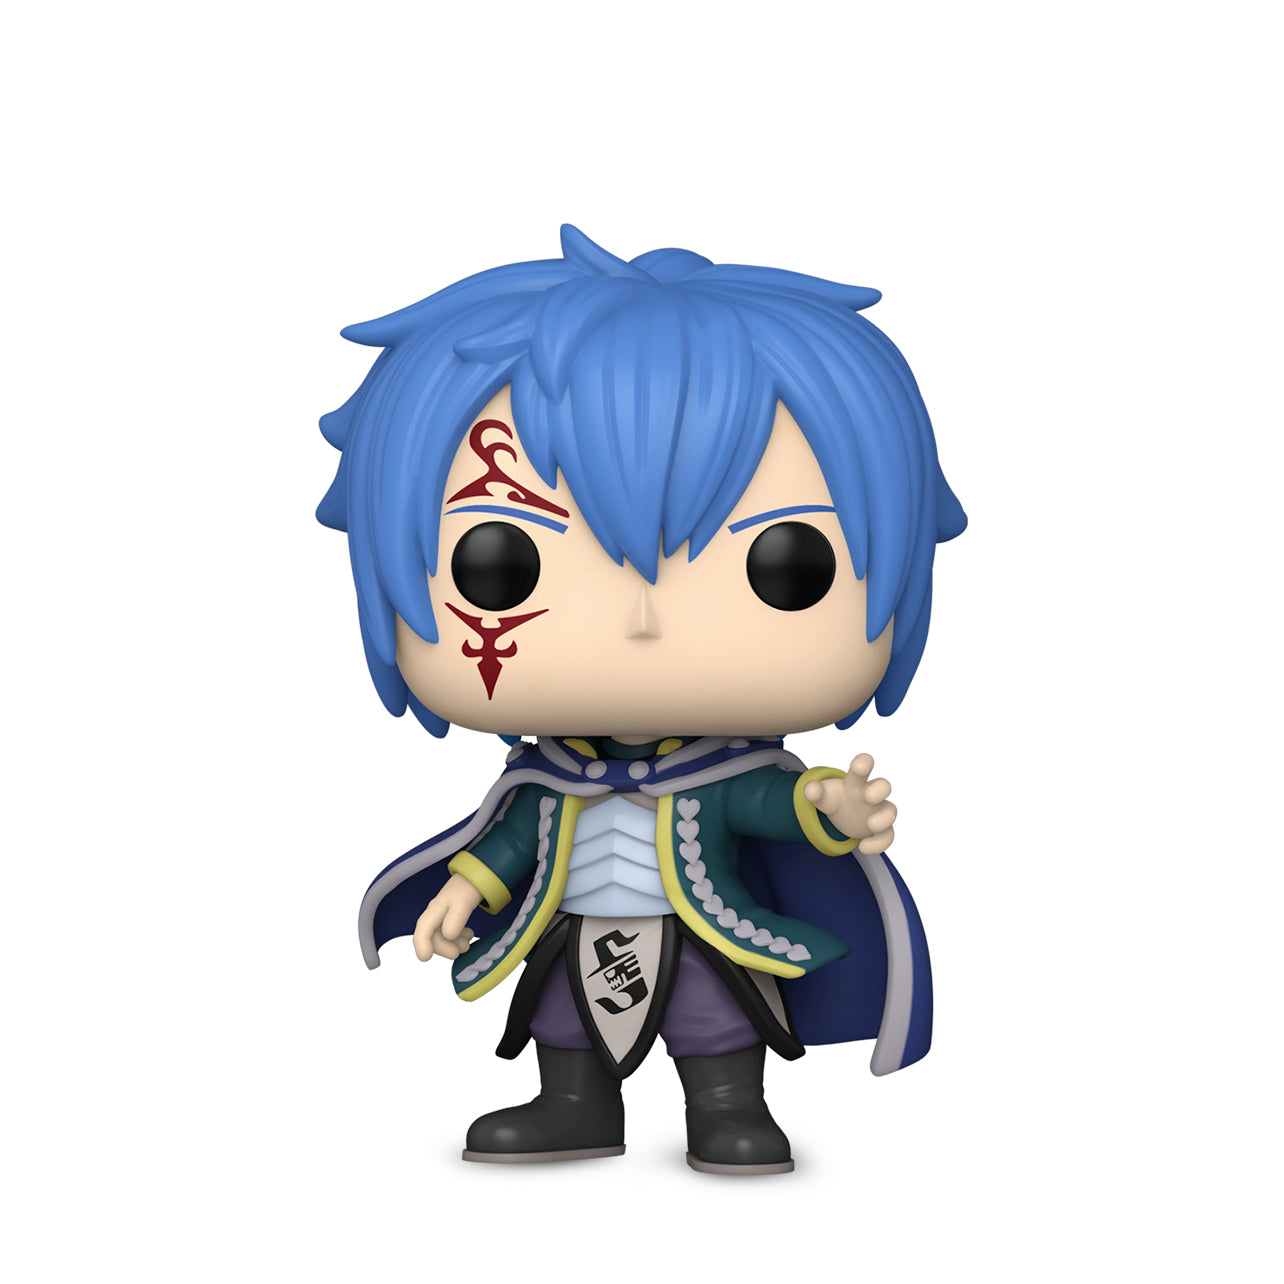 Fairy Tail - Jellal Fernandes Funko Pop! image count 0